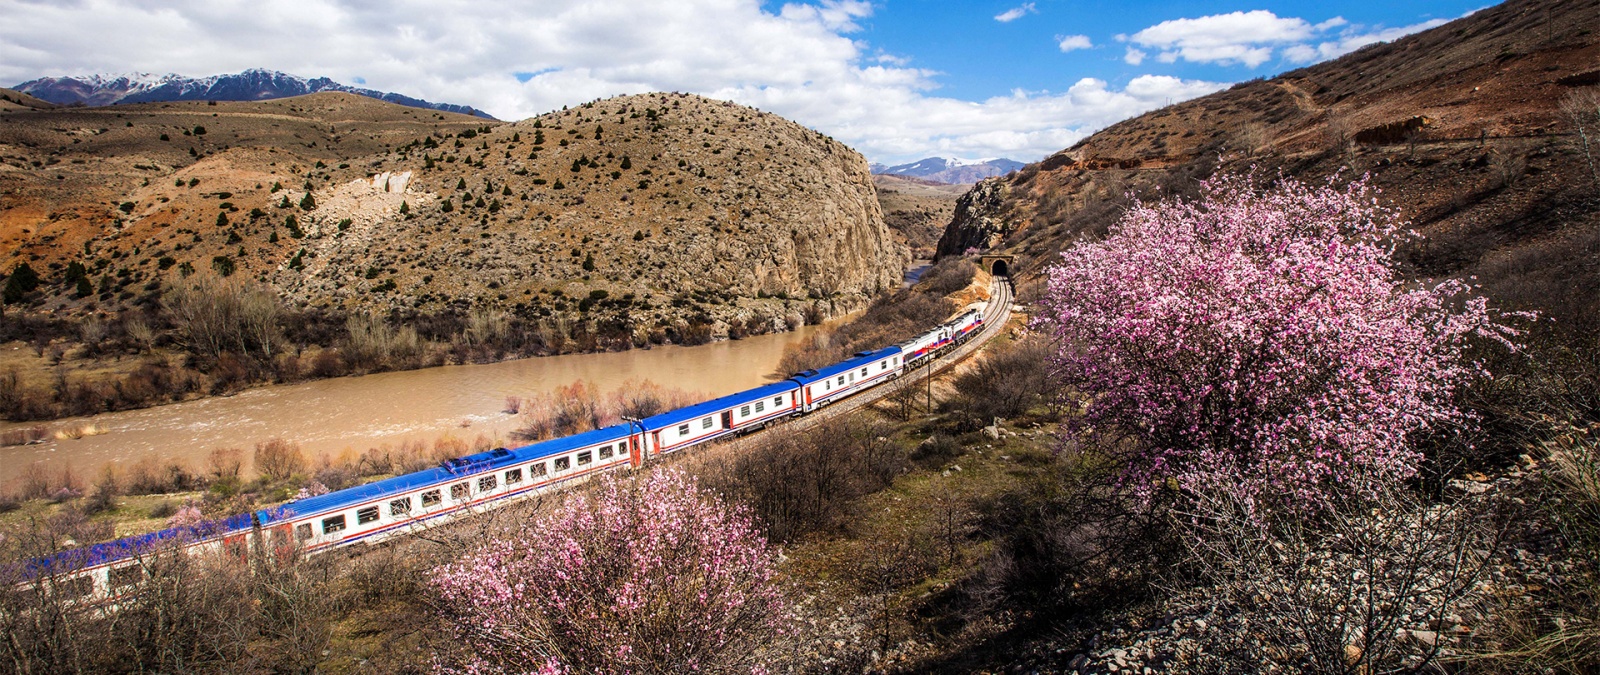 Two new touristic trains in April